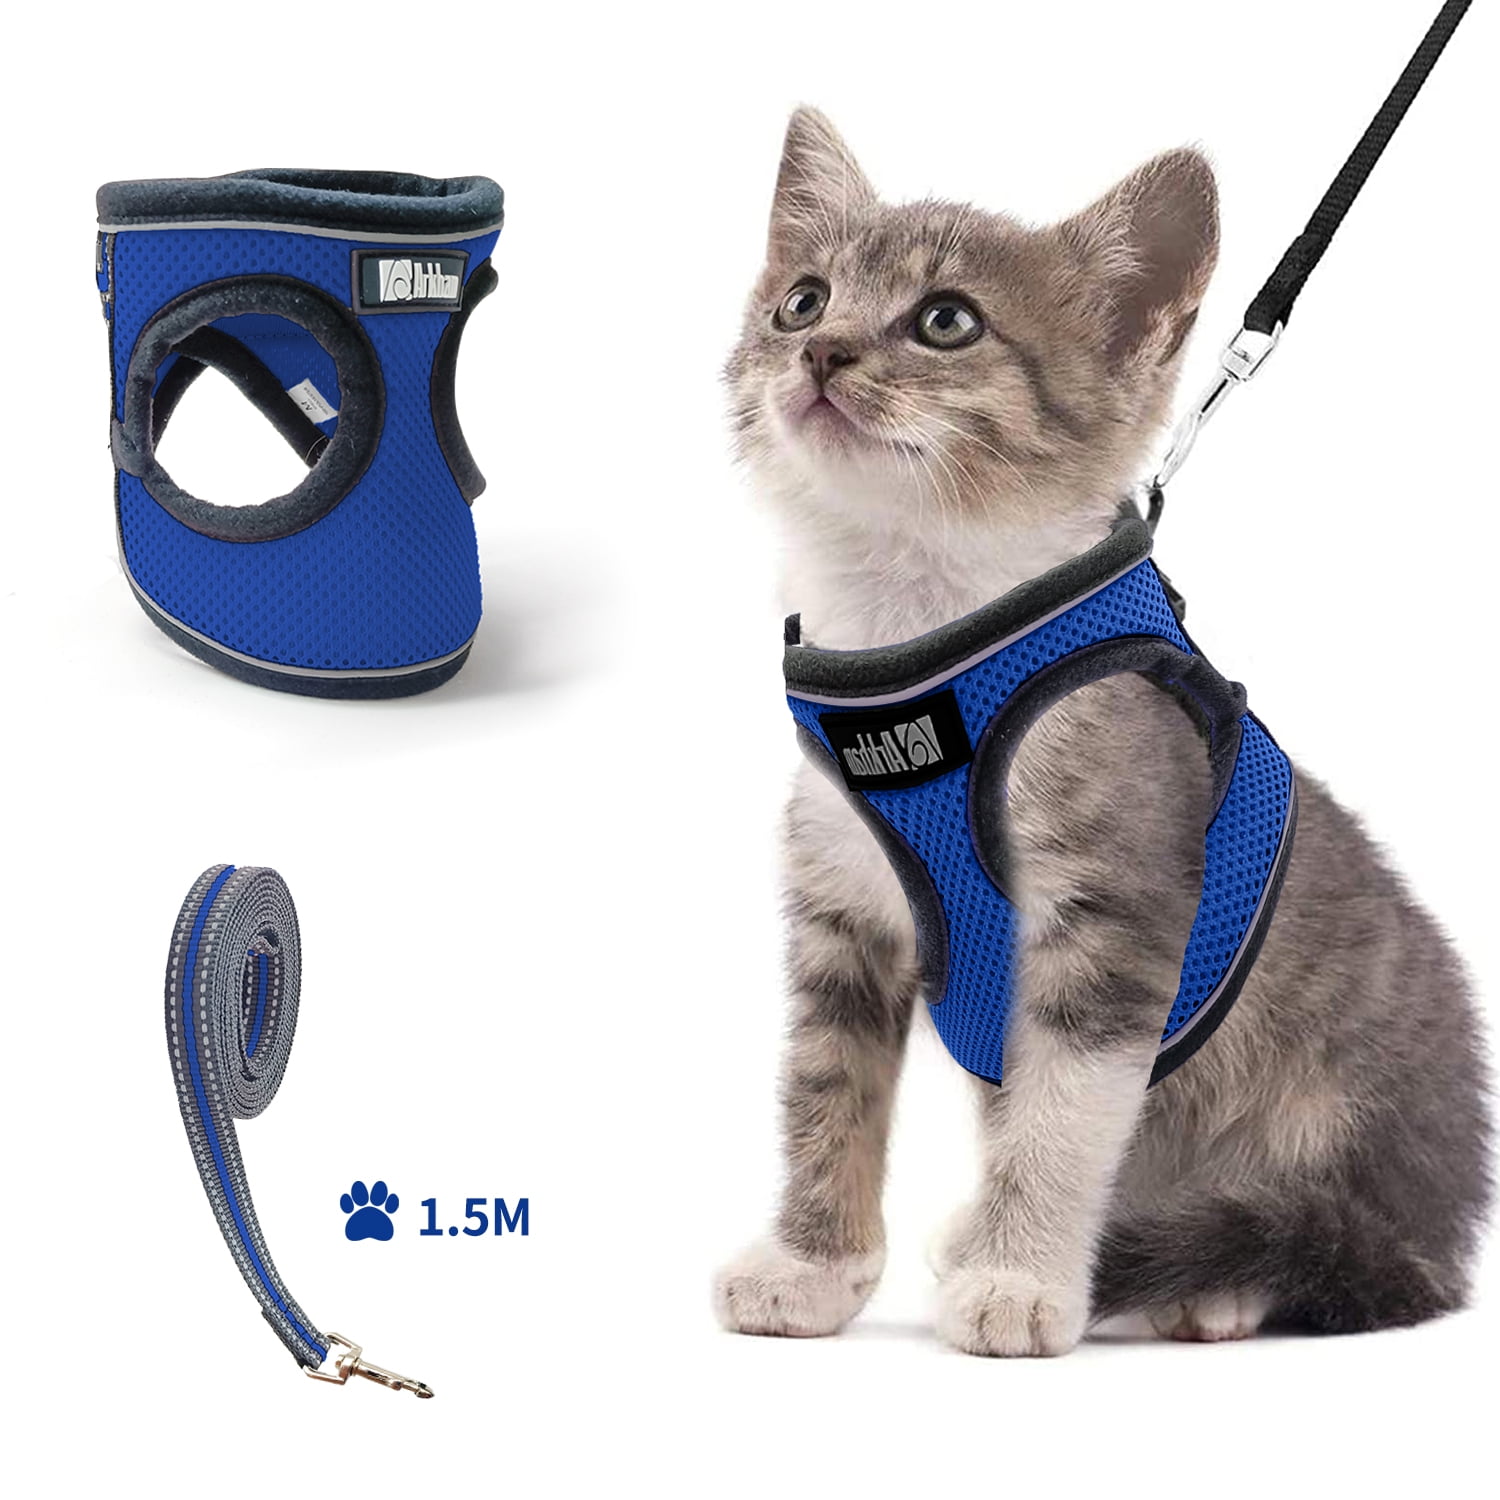 rabbitgoo Cat Harness for Walking Safe Outdoor Cat Jacket with Reflective Strips & 1 Metal Leash Ring Small Cats Soft Mesh Harness Adjustable Vest Harnesses Escape Proof for Small Medium Cats 